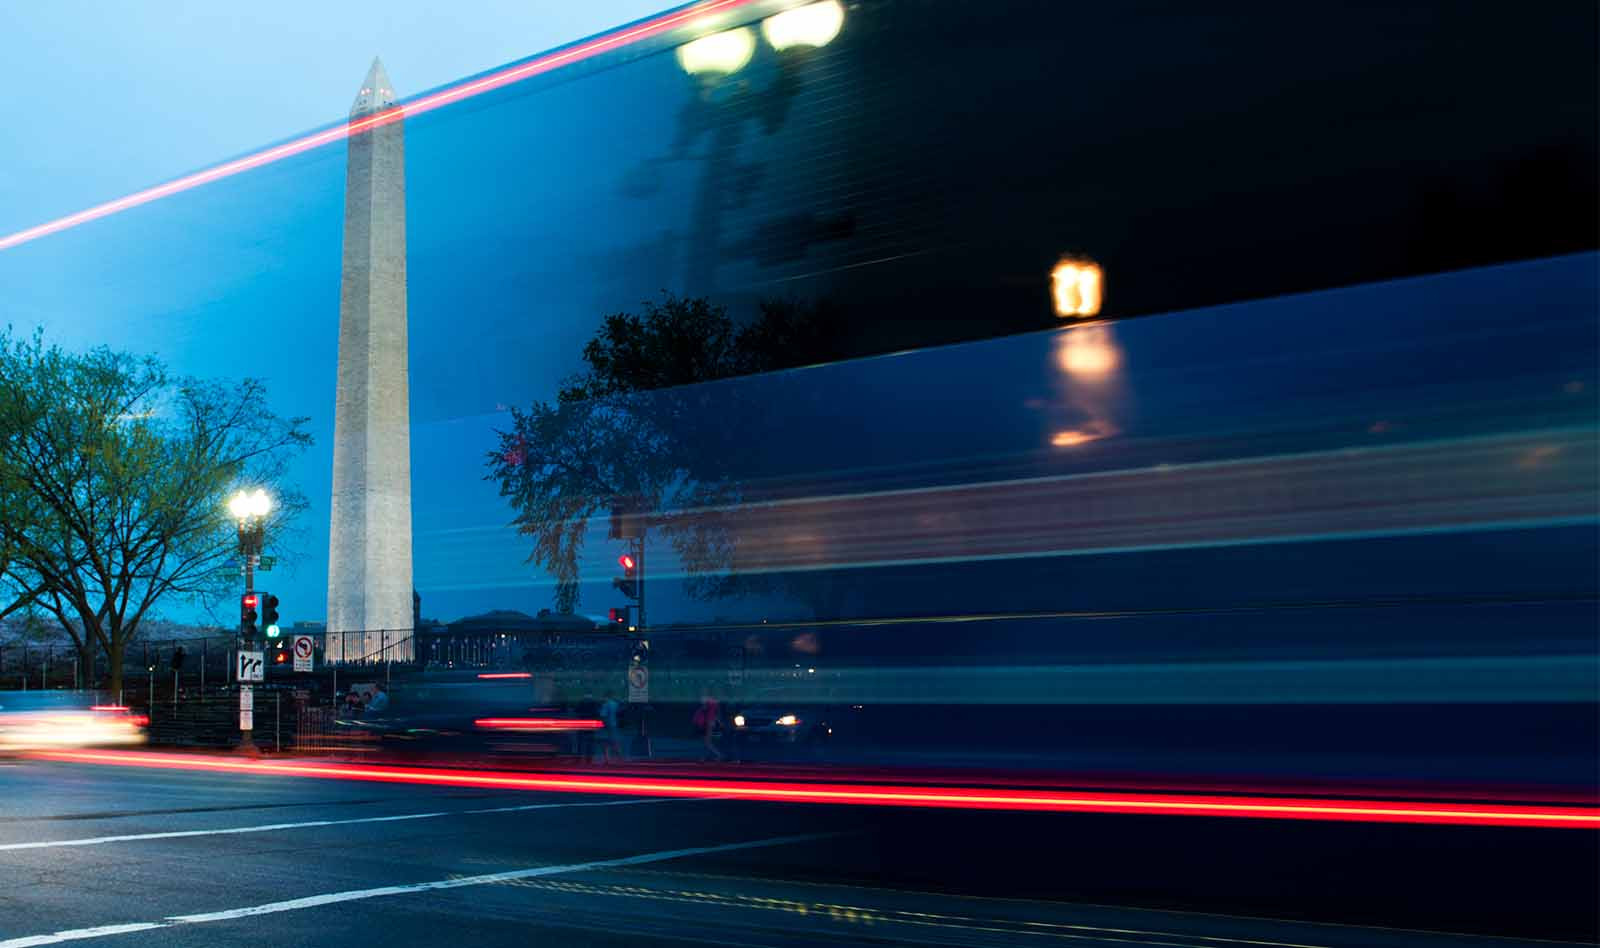 Blurred bus driving past the Washington Monument